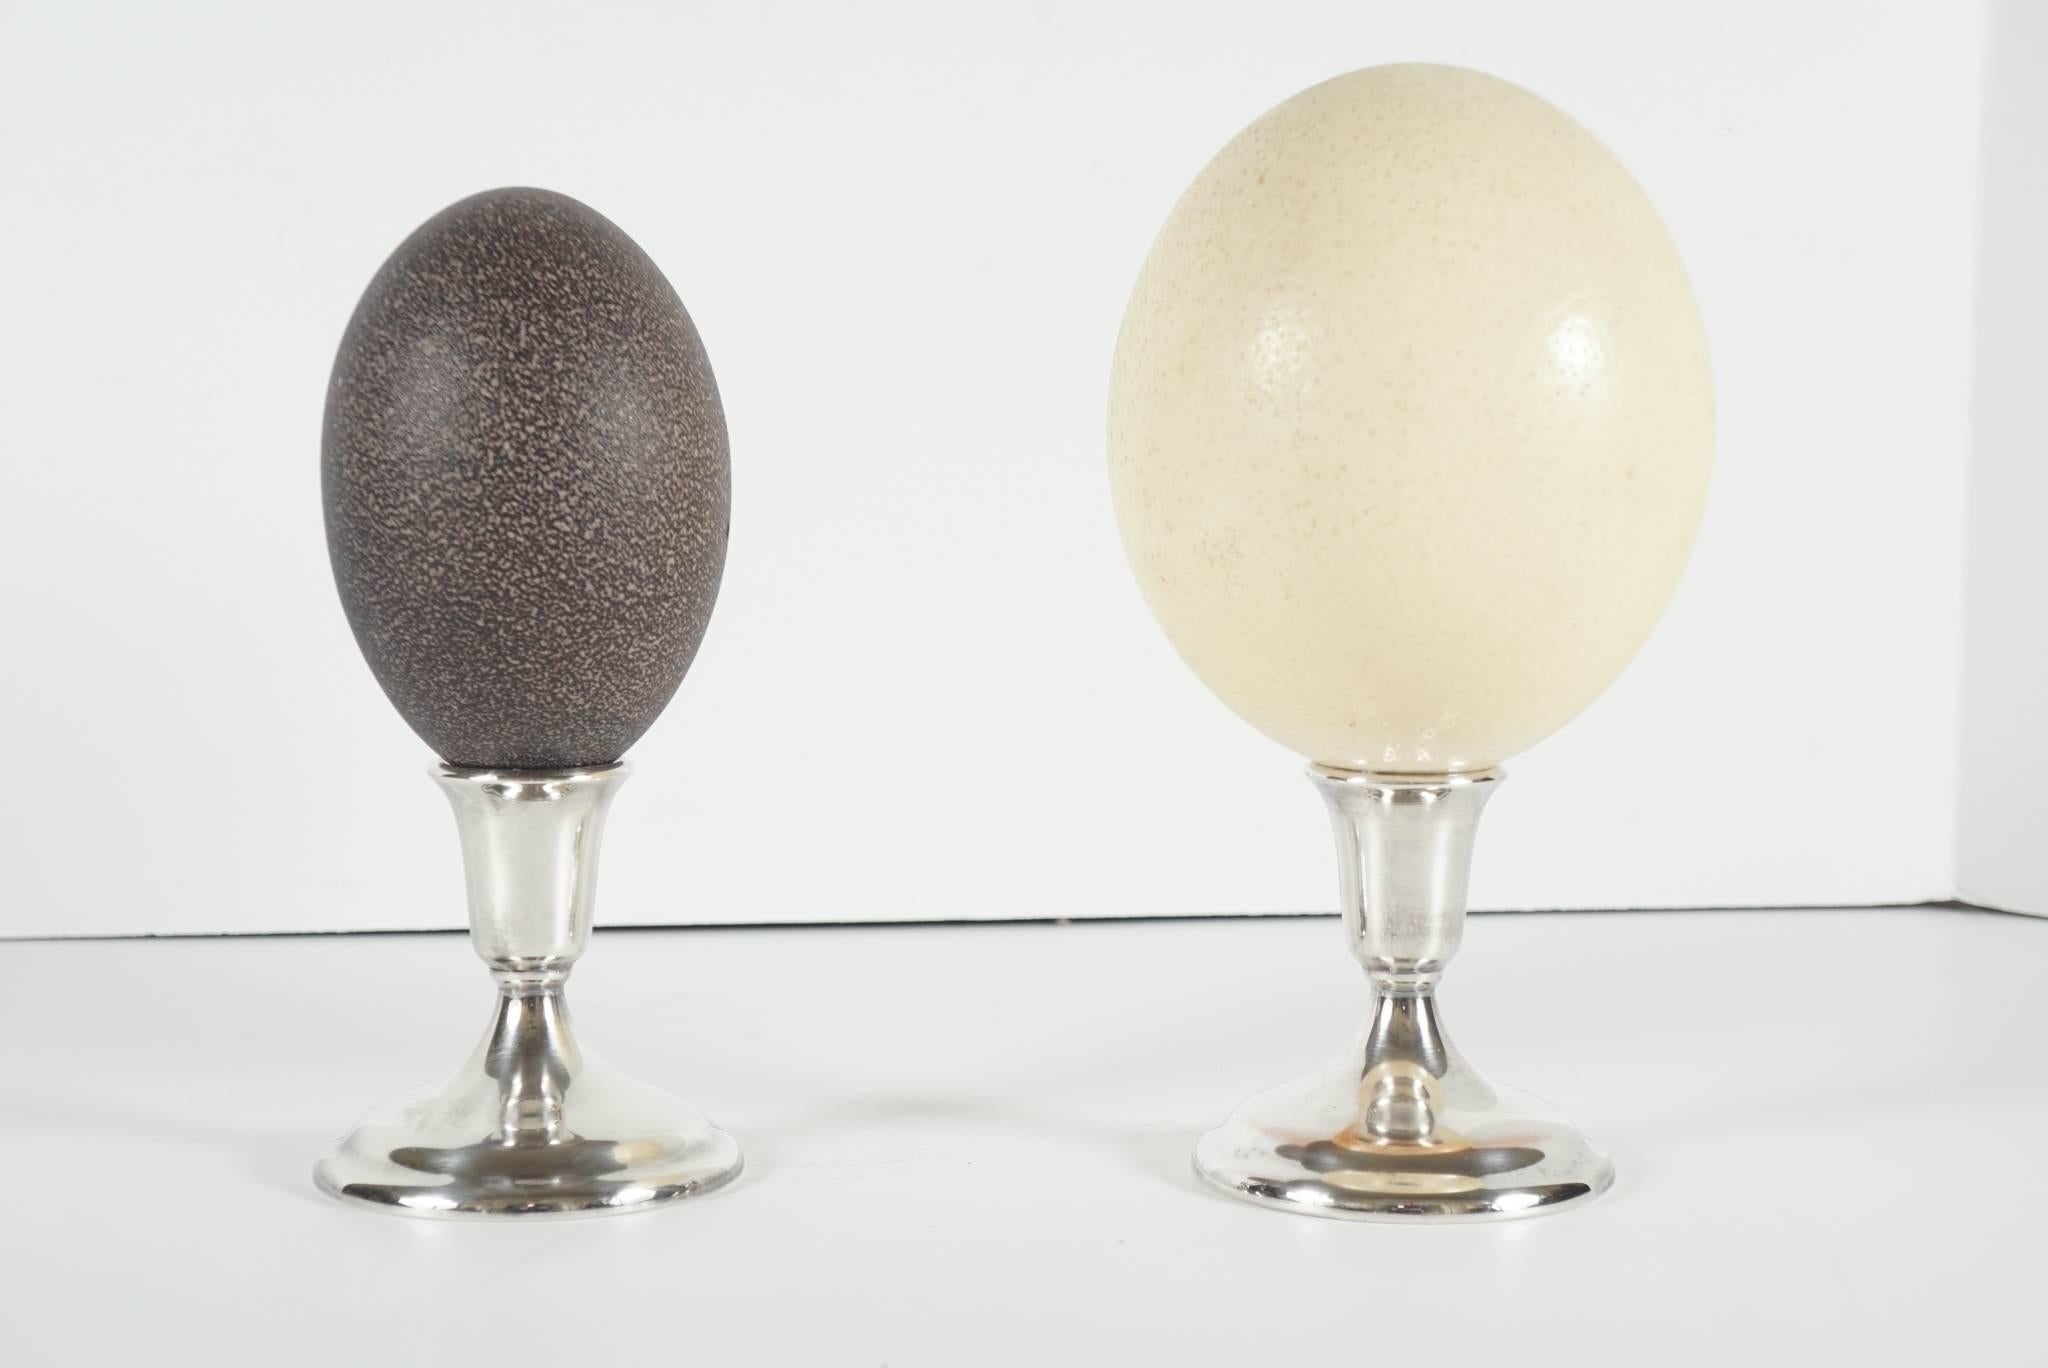 These eggs, one an ostrich the other an emu egg, are of nice size and color and have been mounted on silver plated bases. The bases are made in America. The objects came from an estate that contained a number of other similar items such as a pair of